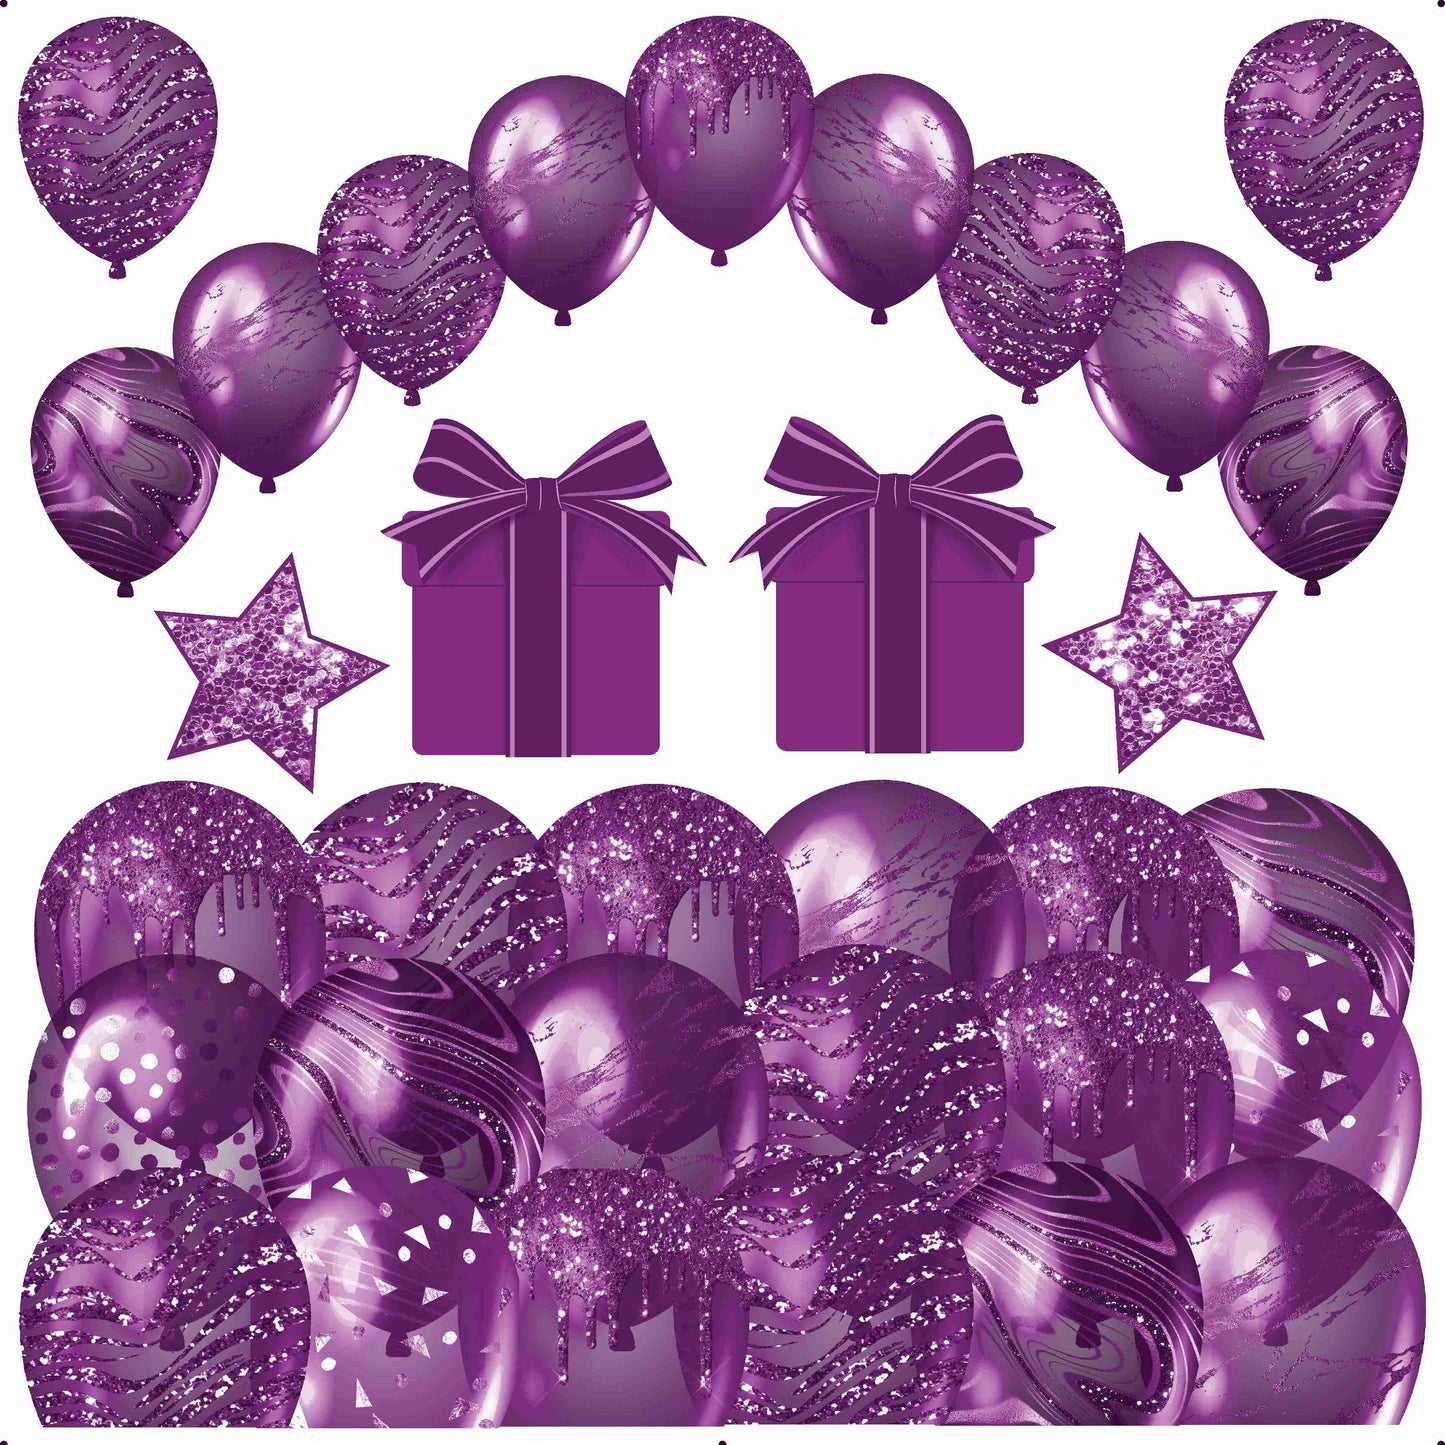 Solid Color Balloon Sheets - Purple - Half Sheet Misc. (Must Purchase 2 Half sheets - You Can Mix & Match)